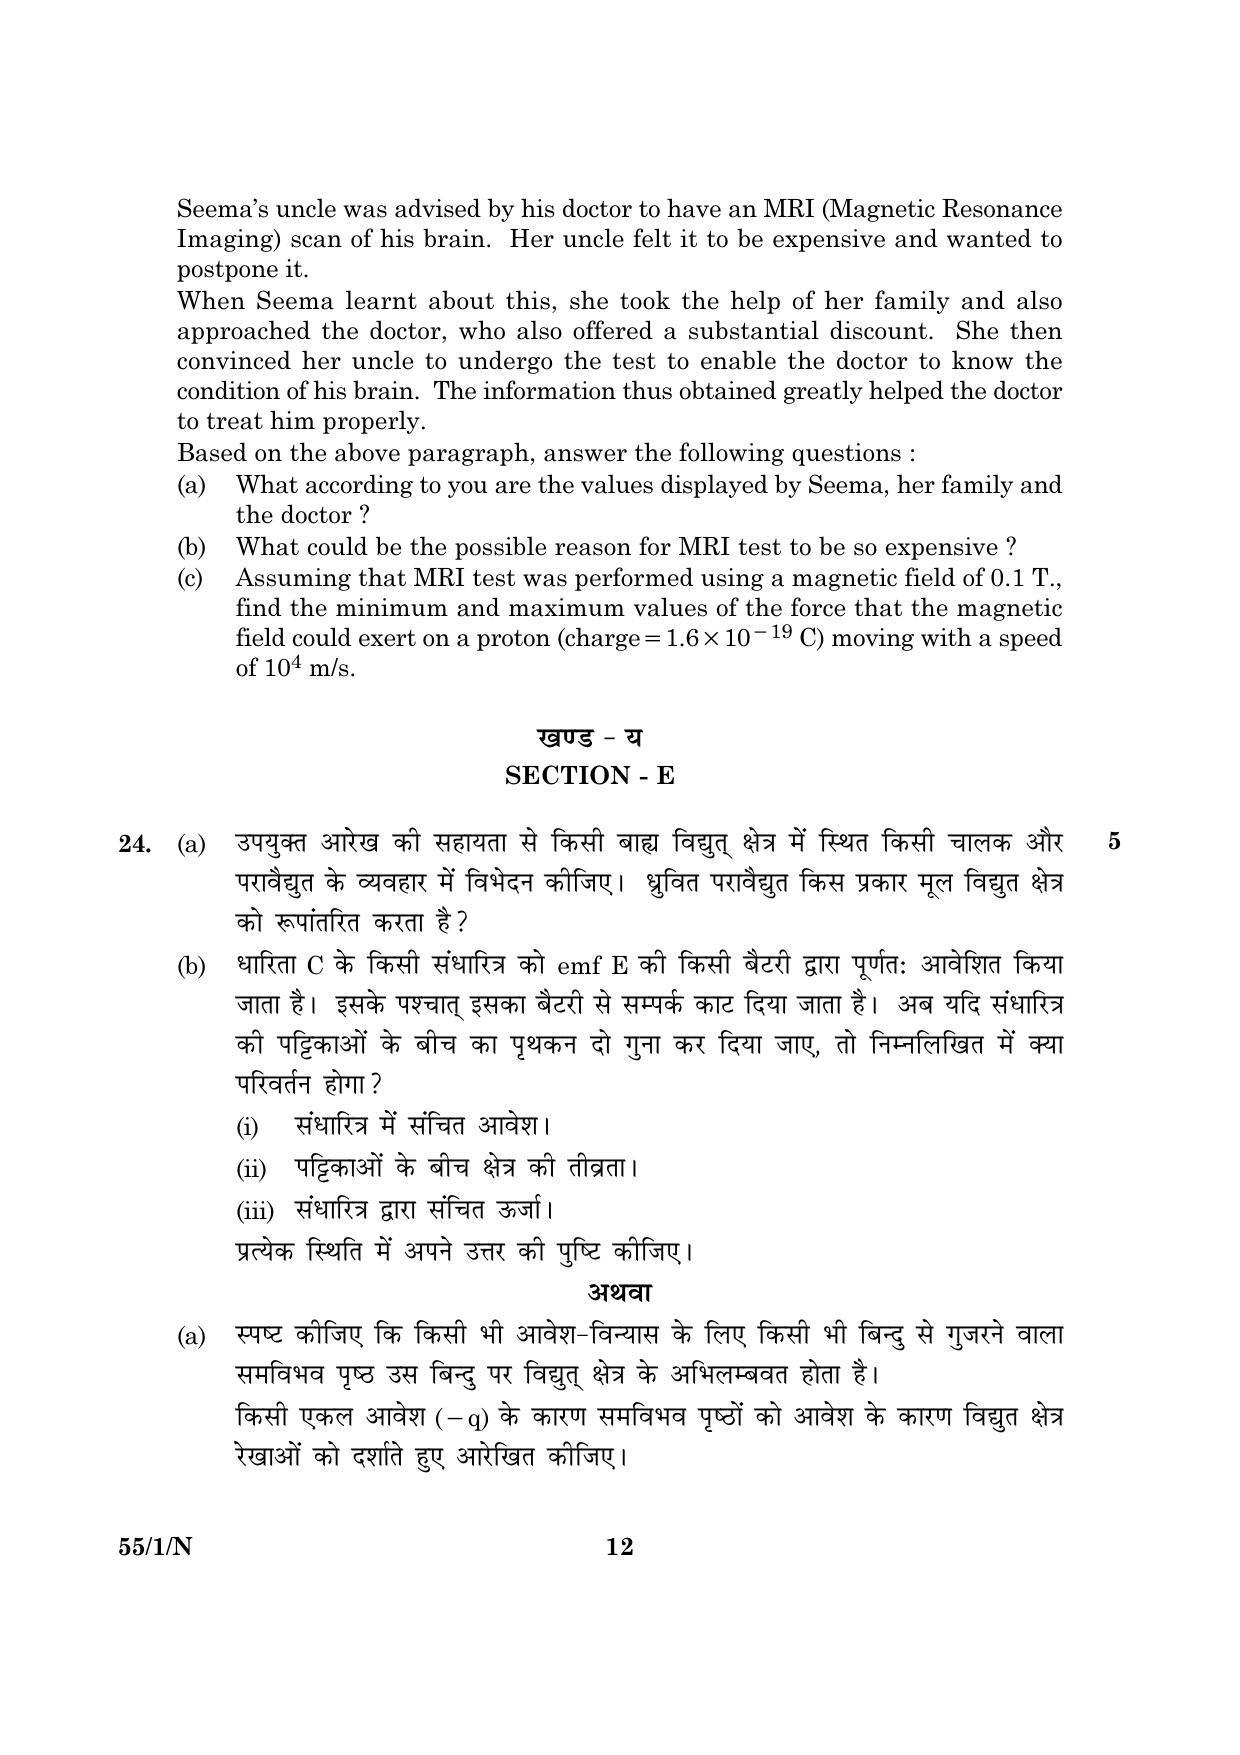 CBSE Class 12 055 Set 1 N Physics Theory 2016 Question Paper - Page 12